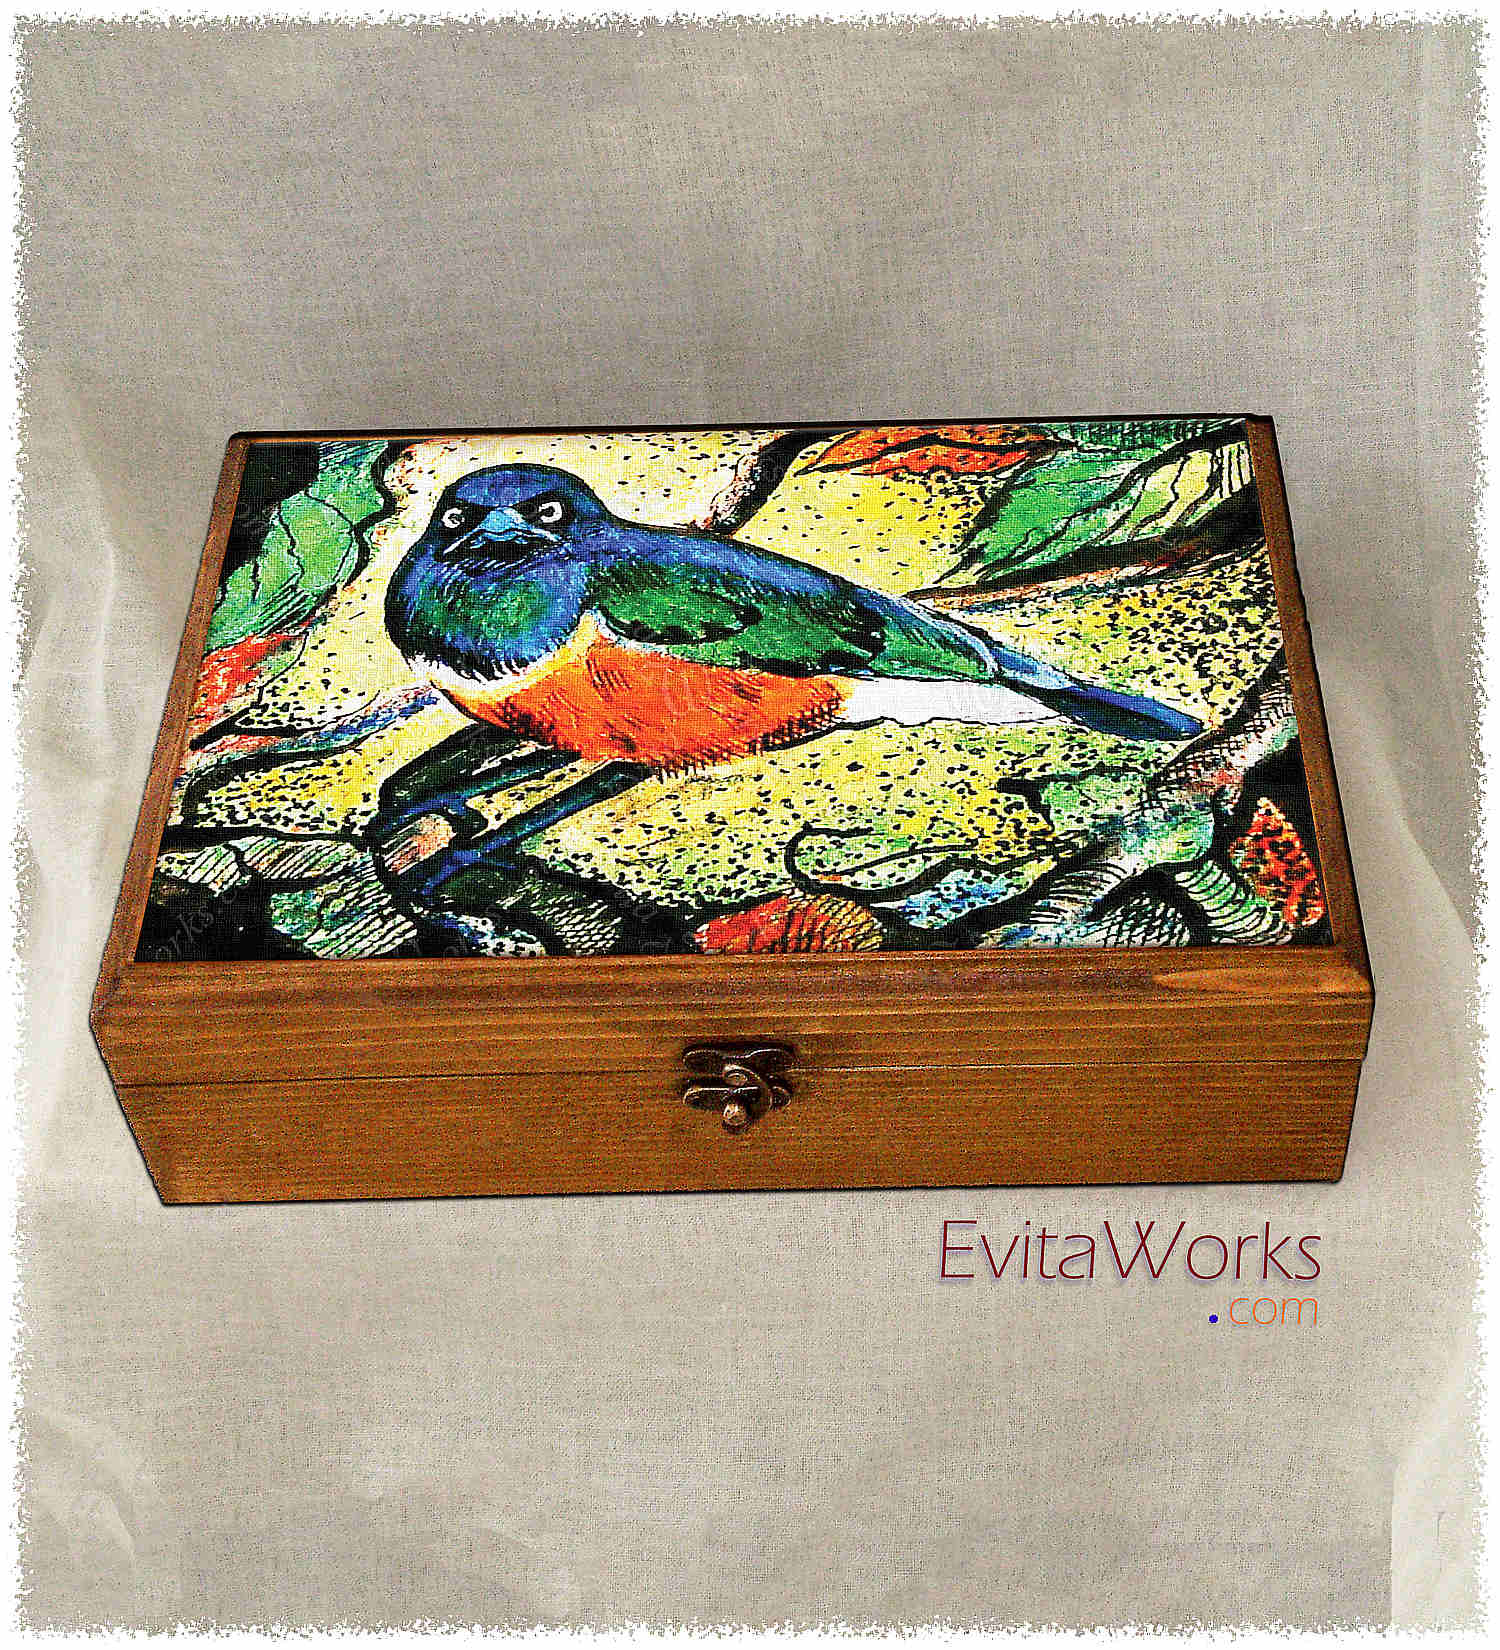 Hit to learn about "Bird in nature illustration 05" on jewelboxes